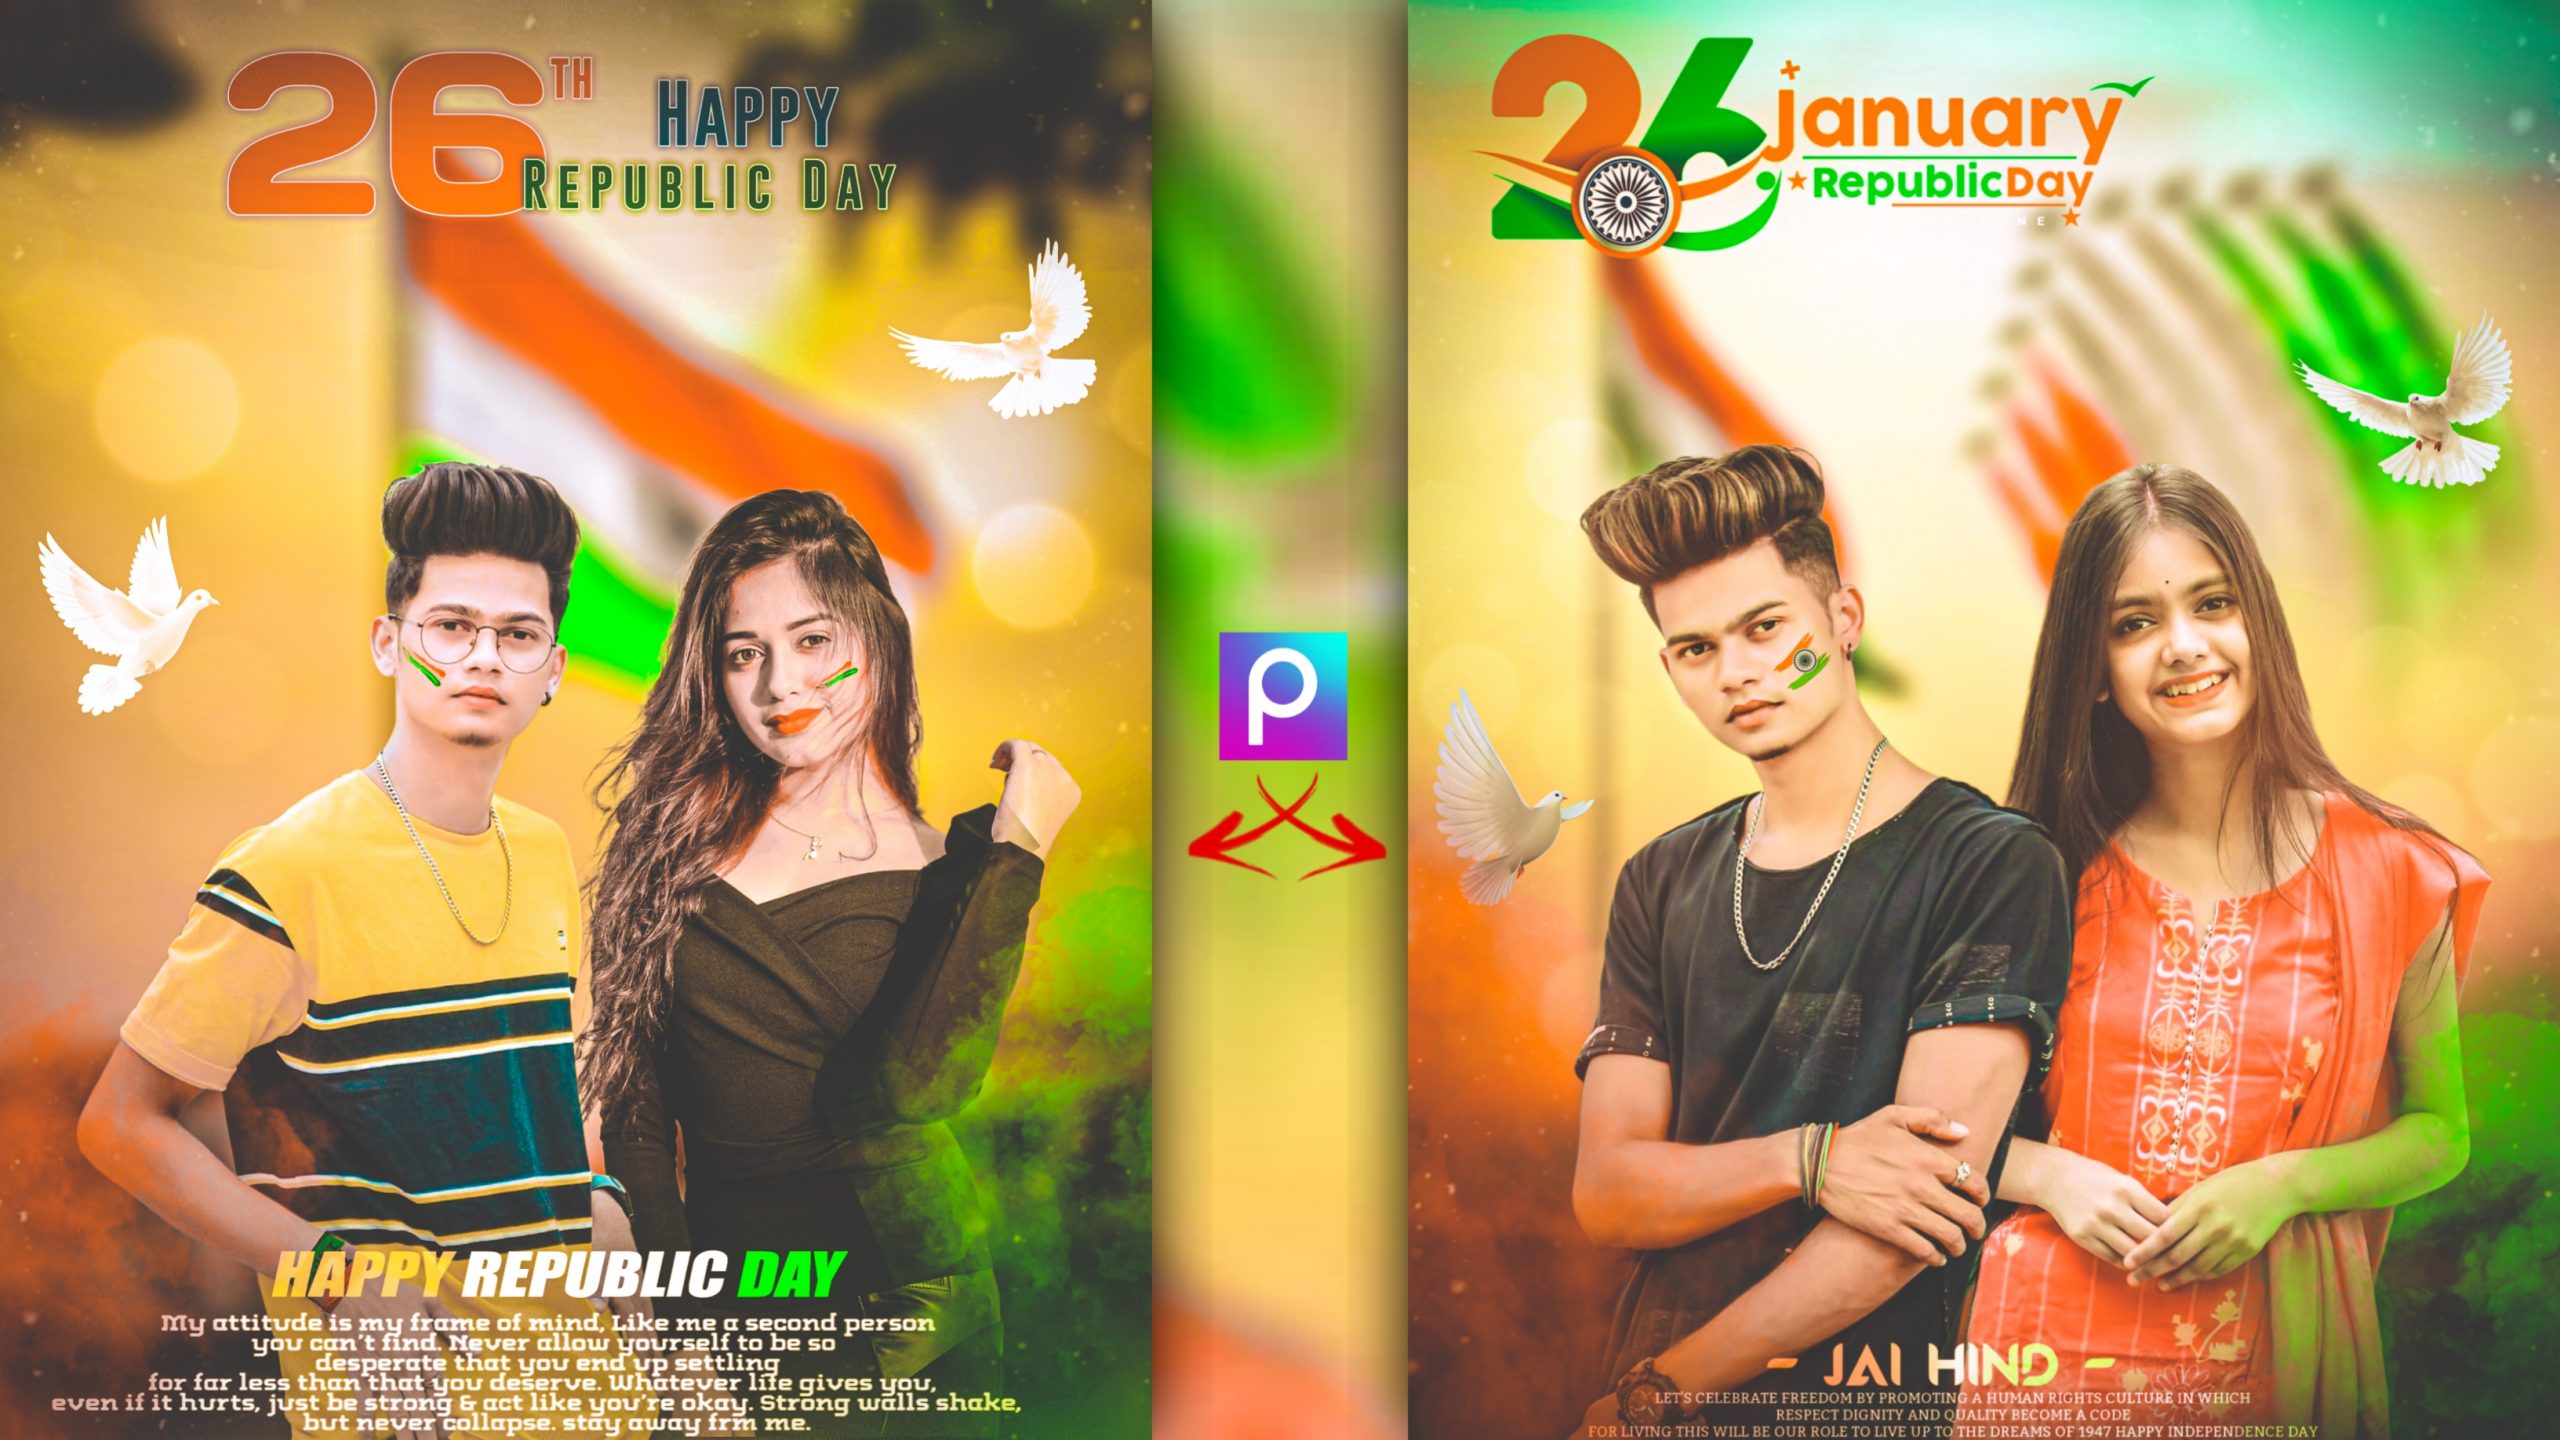 Republic Day Photo Editing Download Background And PNG - Tahir Editz